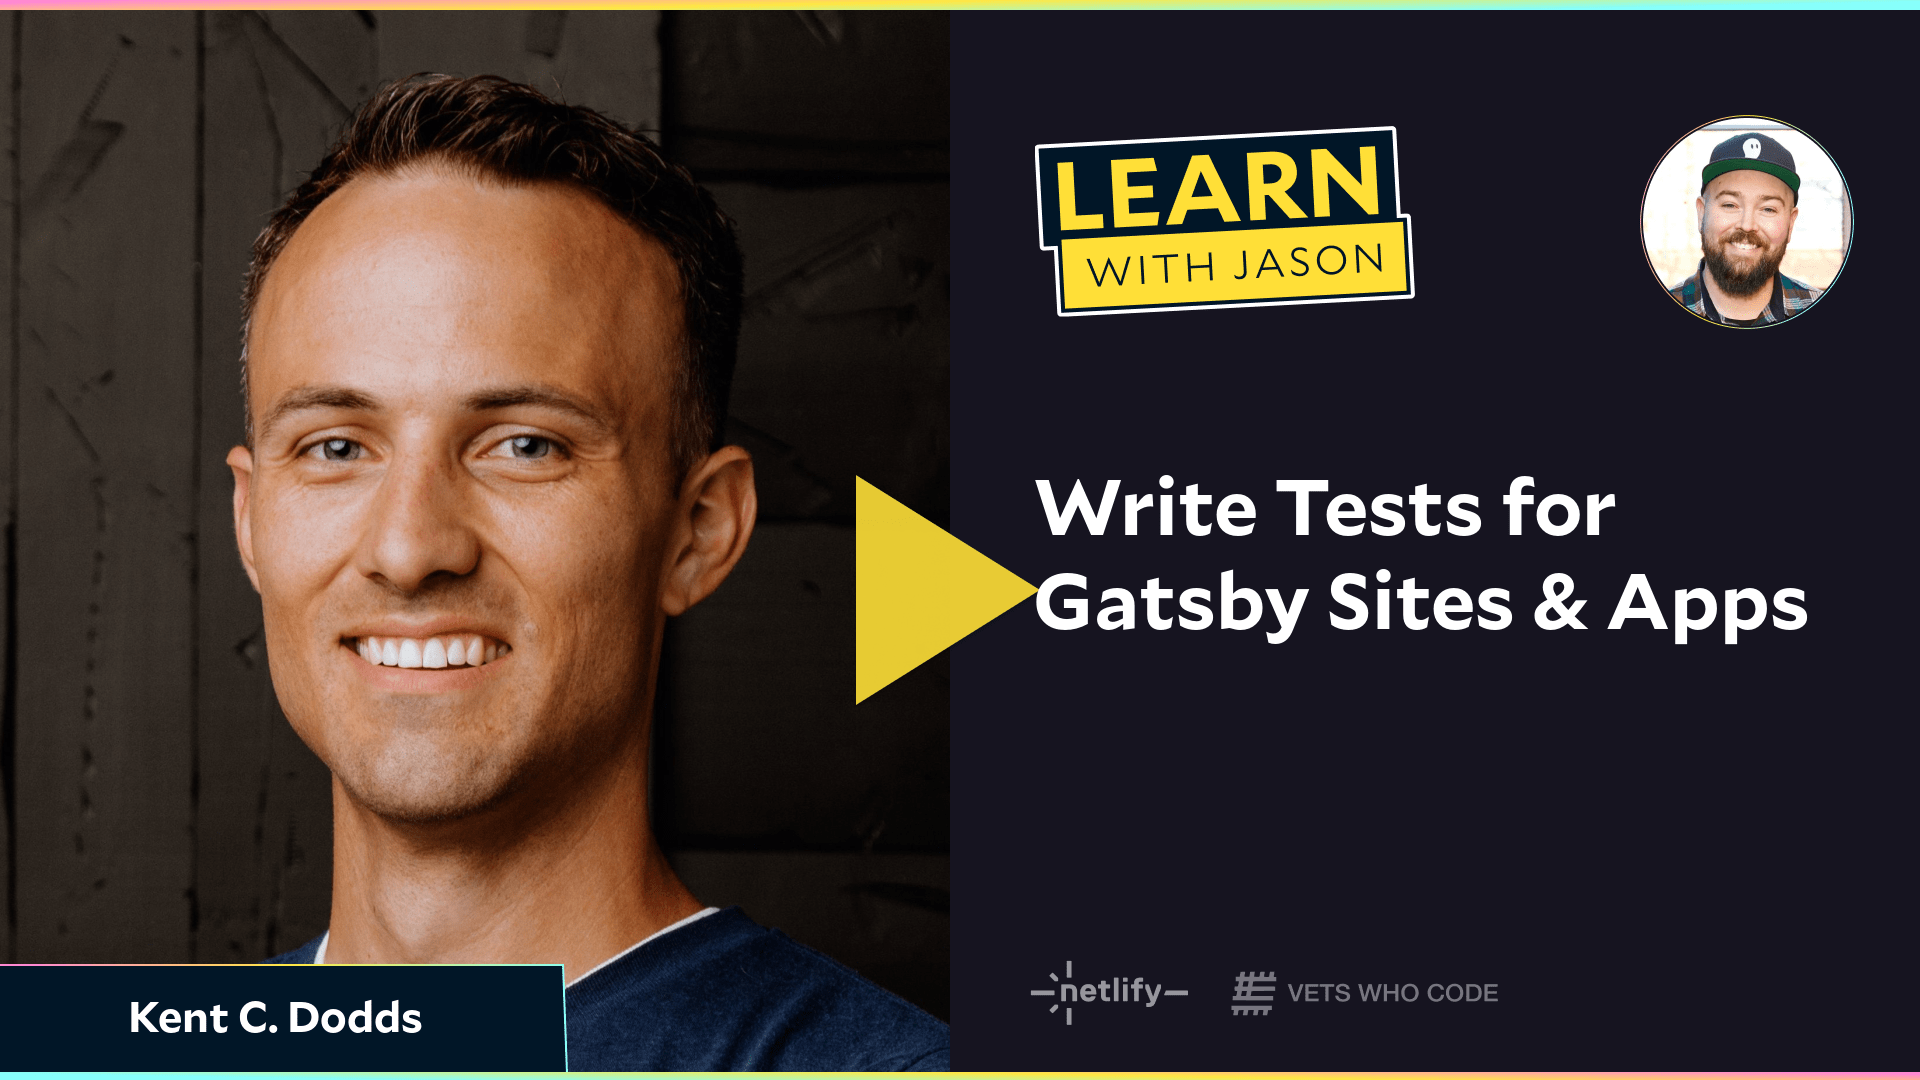 Write Tests for Gatsby Sites & Apps (with Kent C. Dodds)